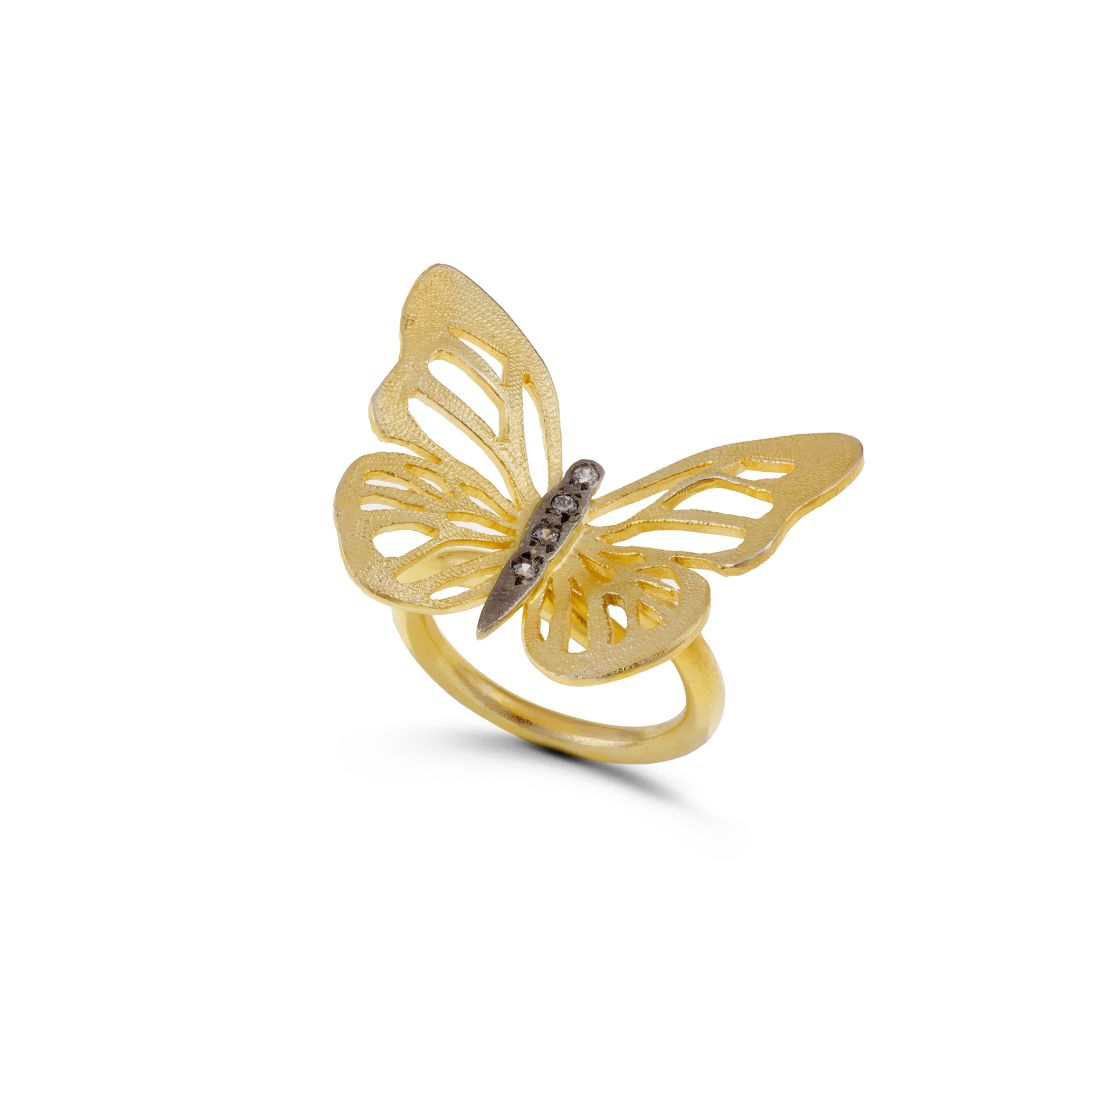 A beautiful and unique handmade butterfly ring - Spring is here!